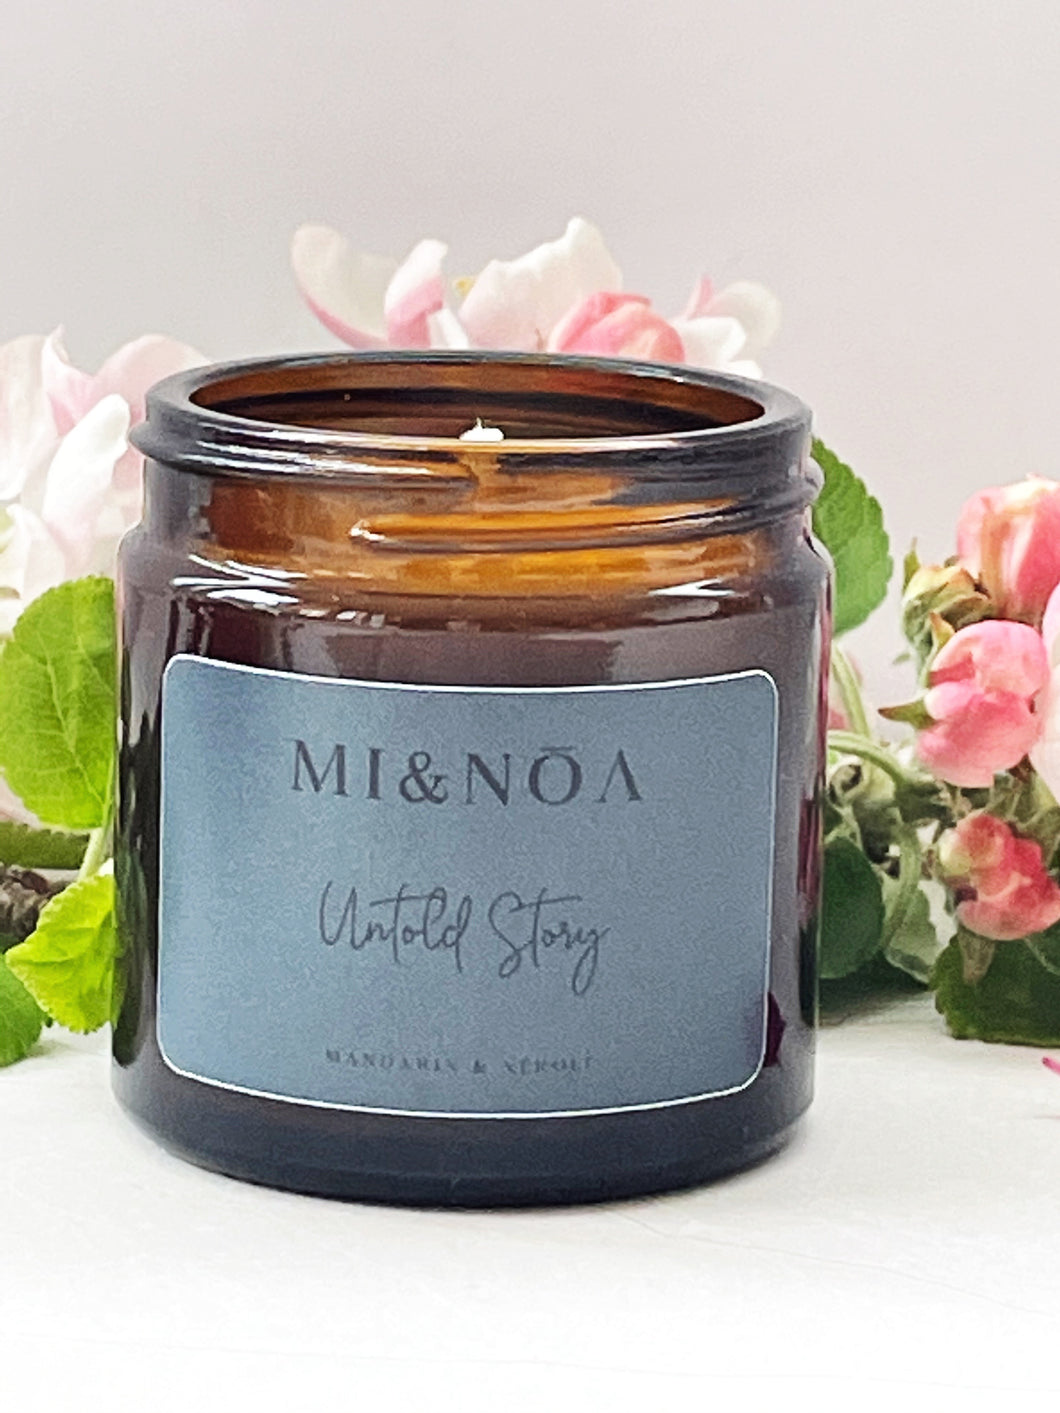 Untold Story Soy Wax Candle Gift